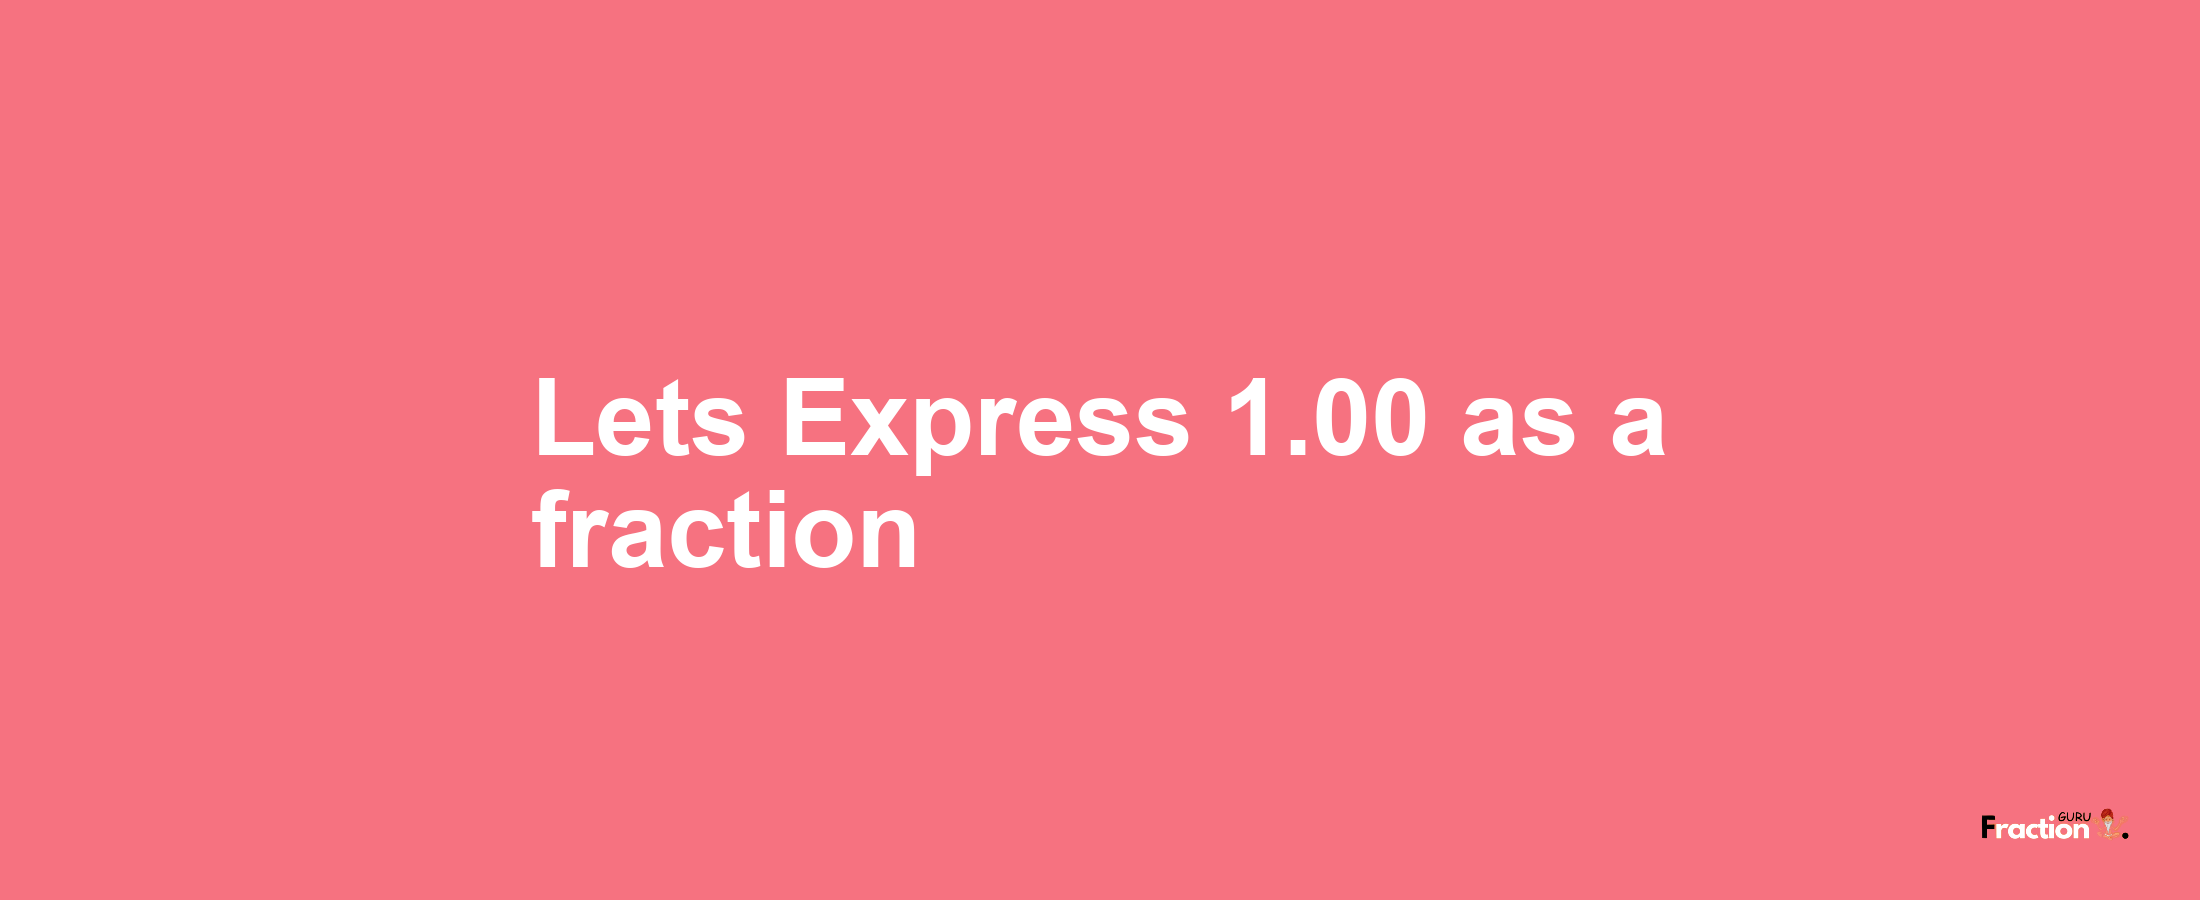 Lets Express 1.00 as afraction